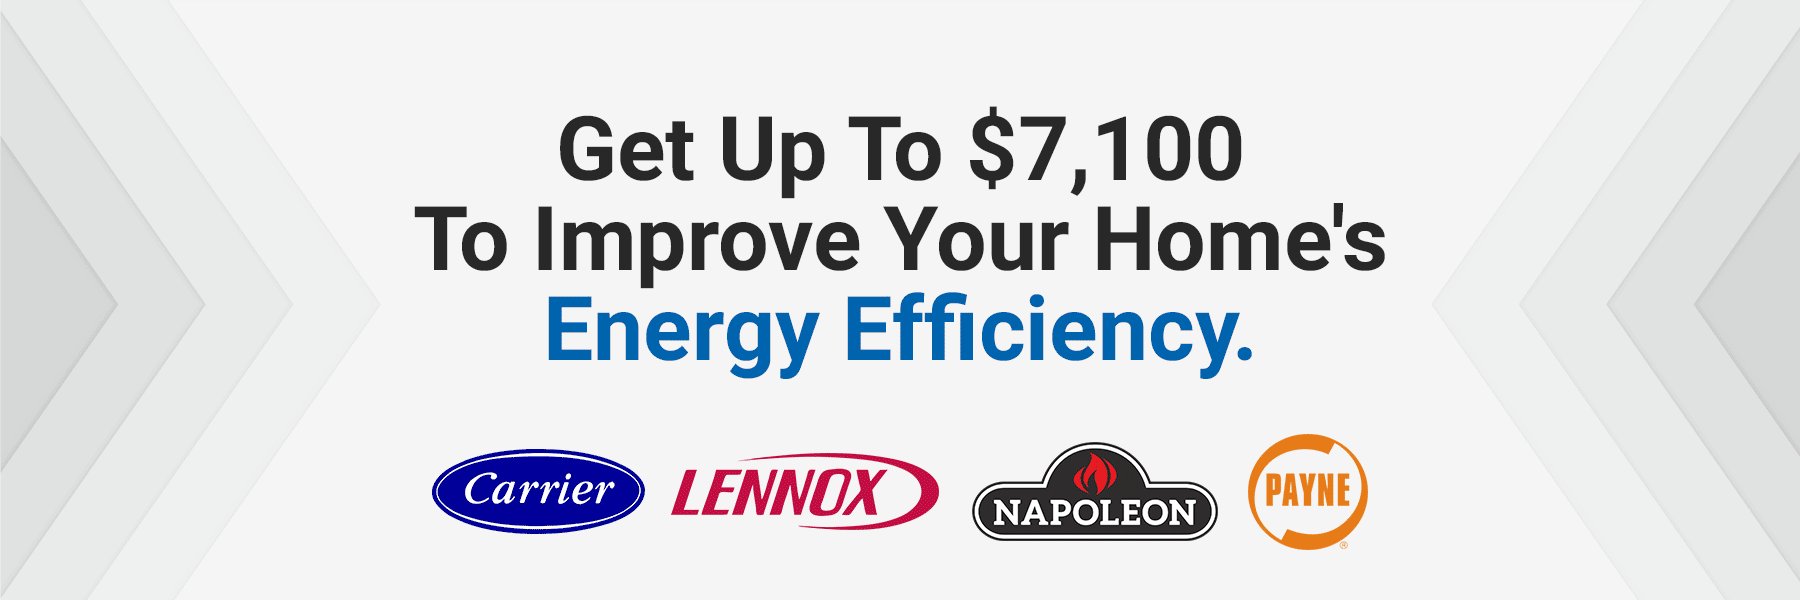 Ontario Lennox MLA Cold Climate Mini-split Ductless System Heat Pump incentives